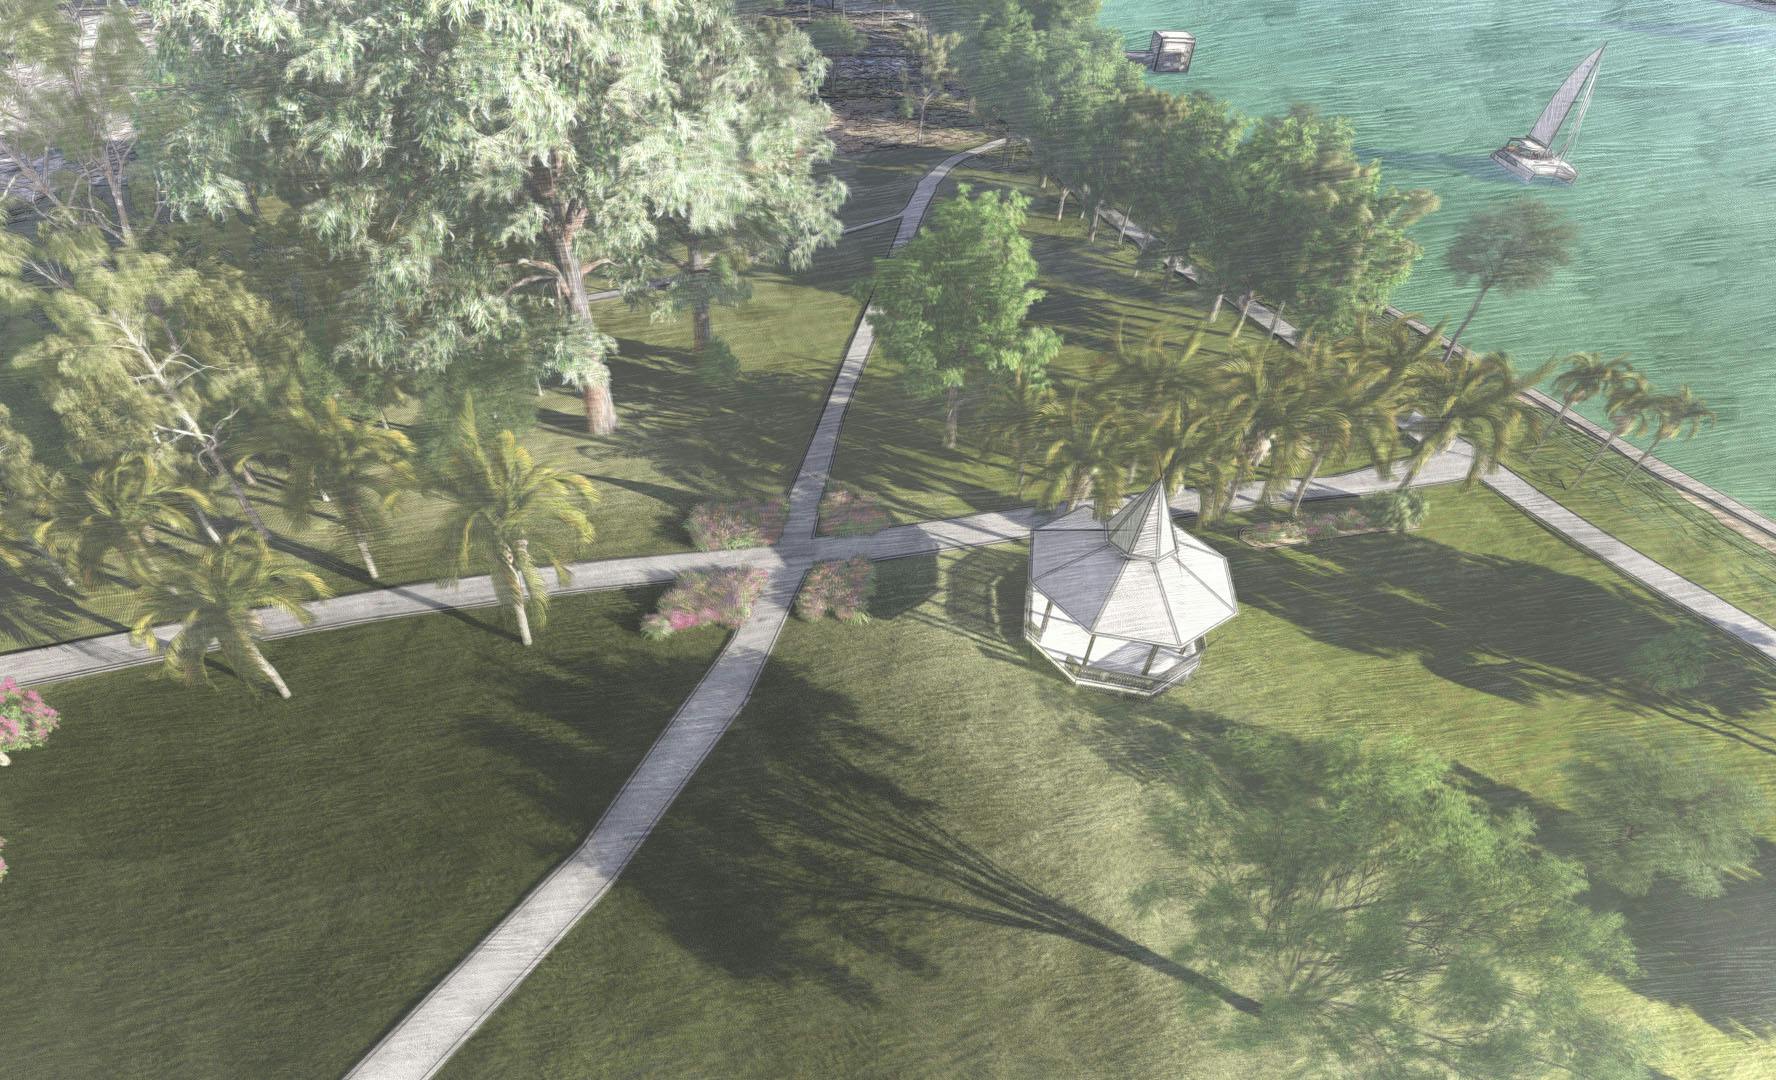 Artist’s impression of an aerial view of Mowbray Park